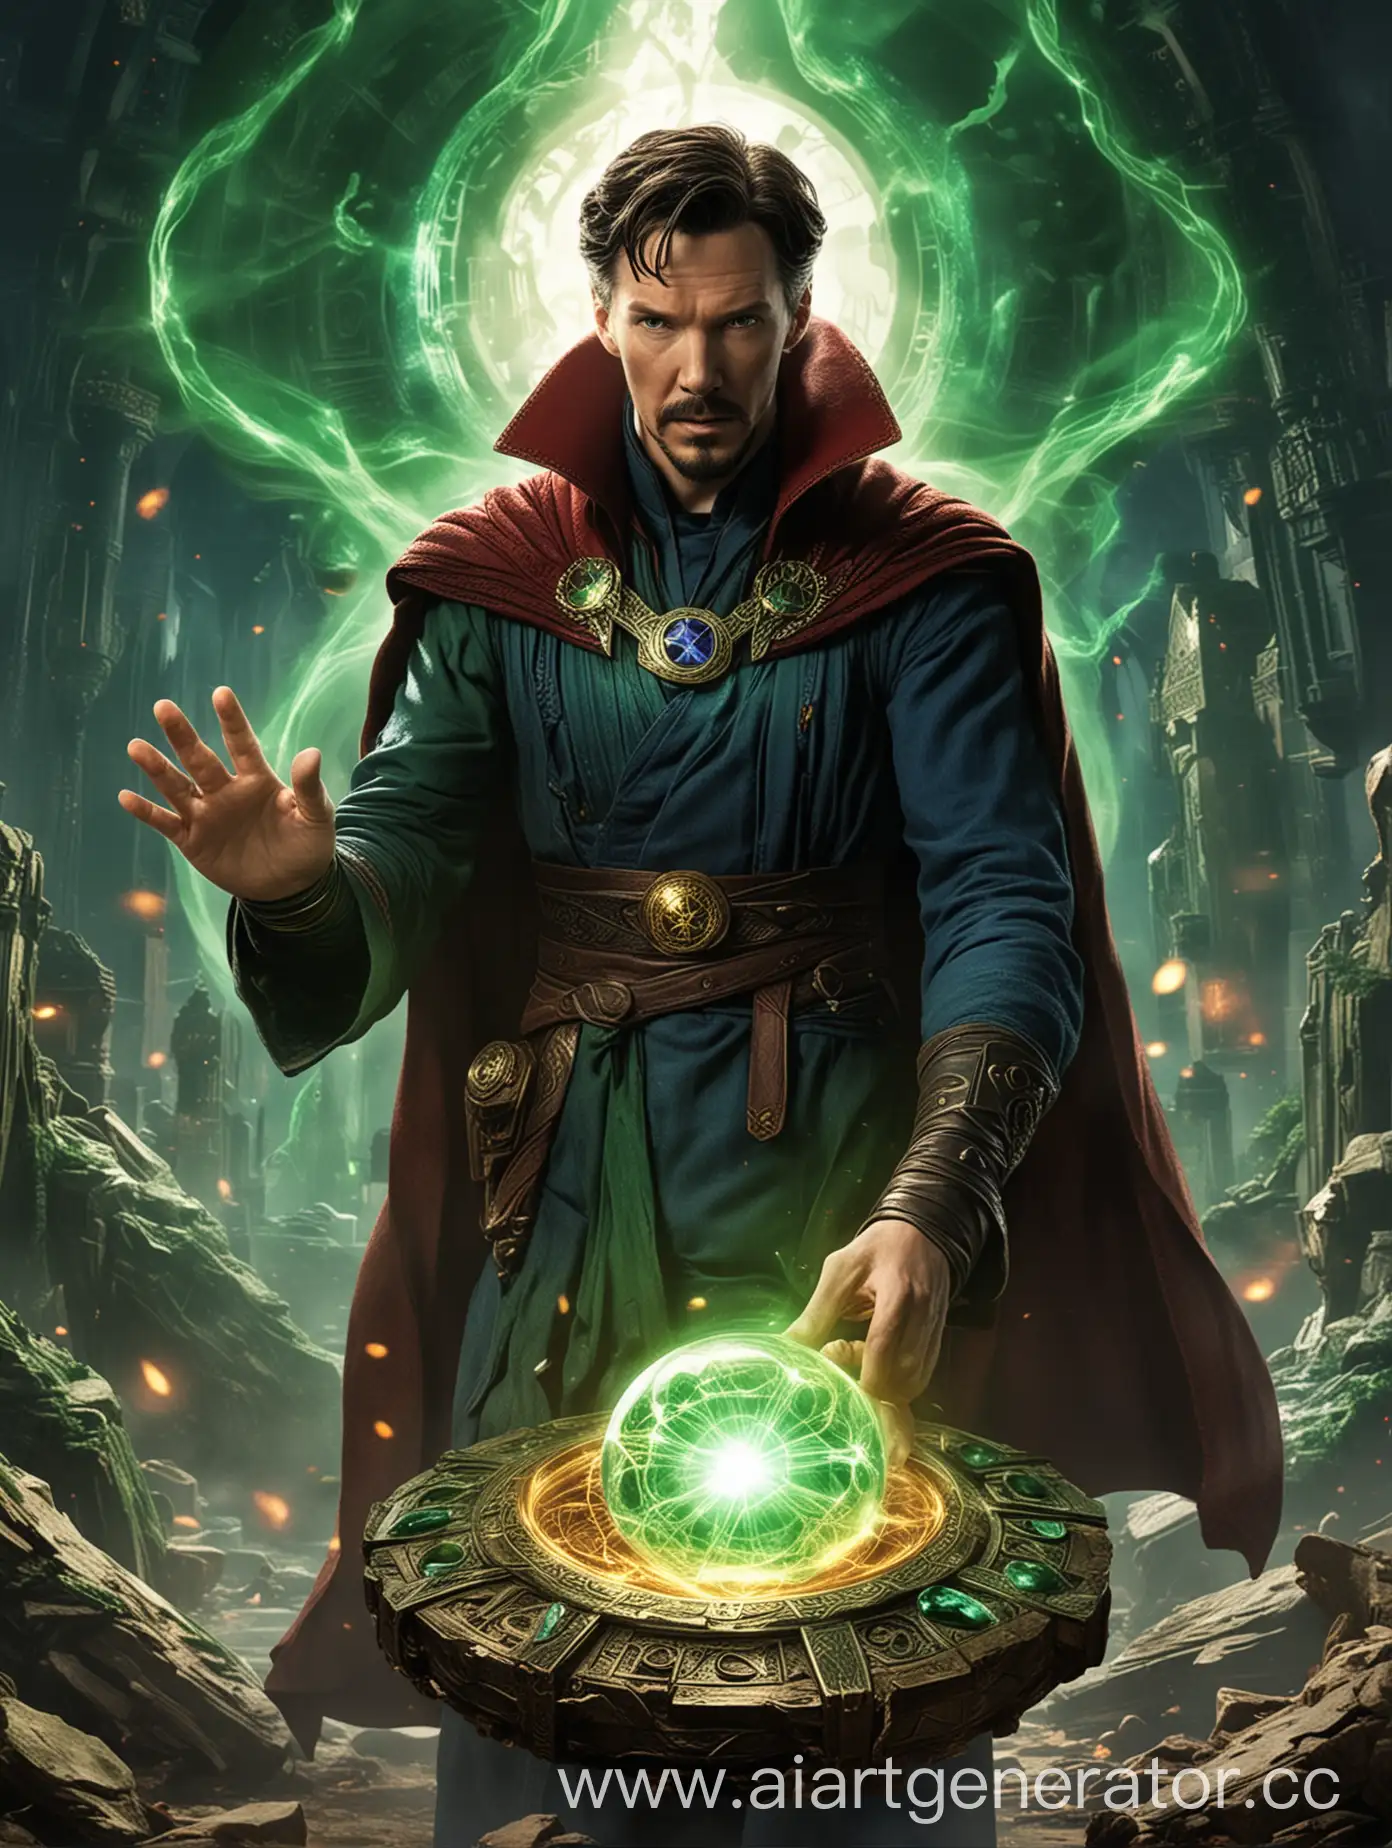 Doctor-Strange-with-Time-Stone-and-Green-Magic-Mystic-Sorcerer-Mastering-Ancient-Arts